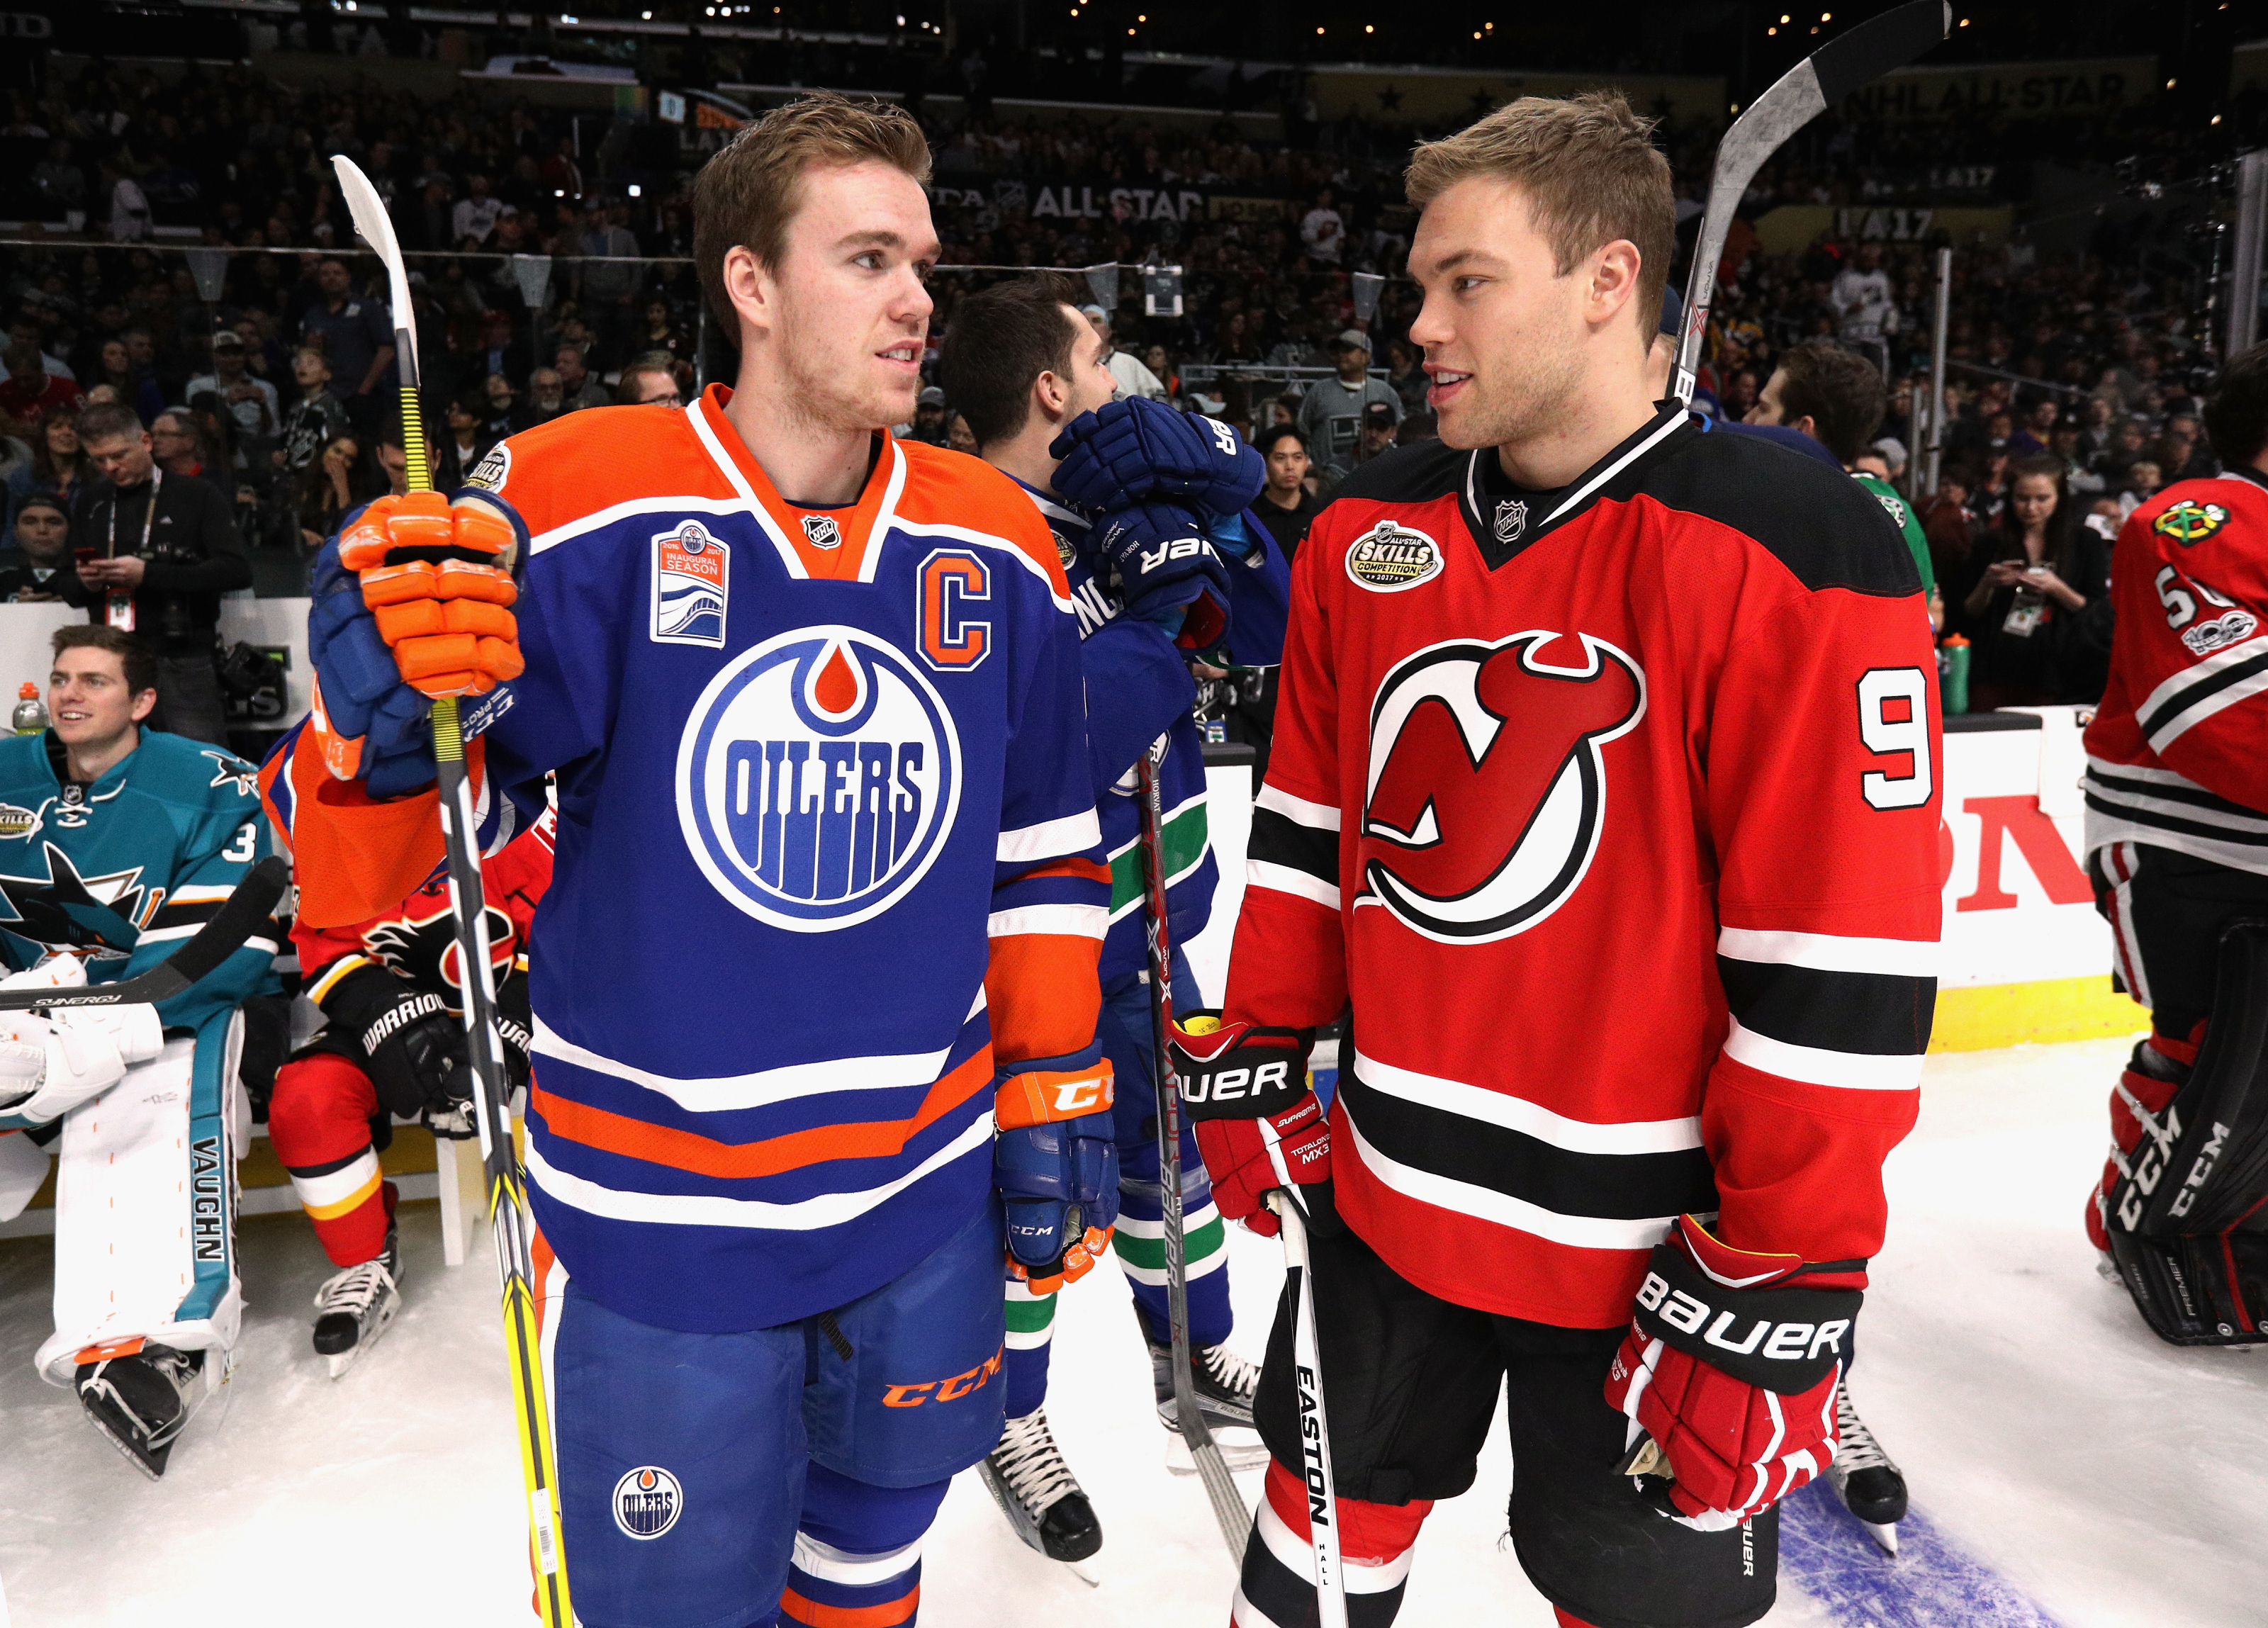 What Happened to Taylor Hall this Season?